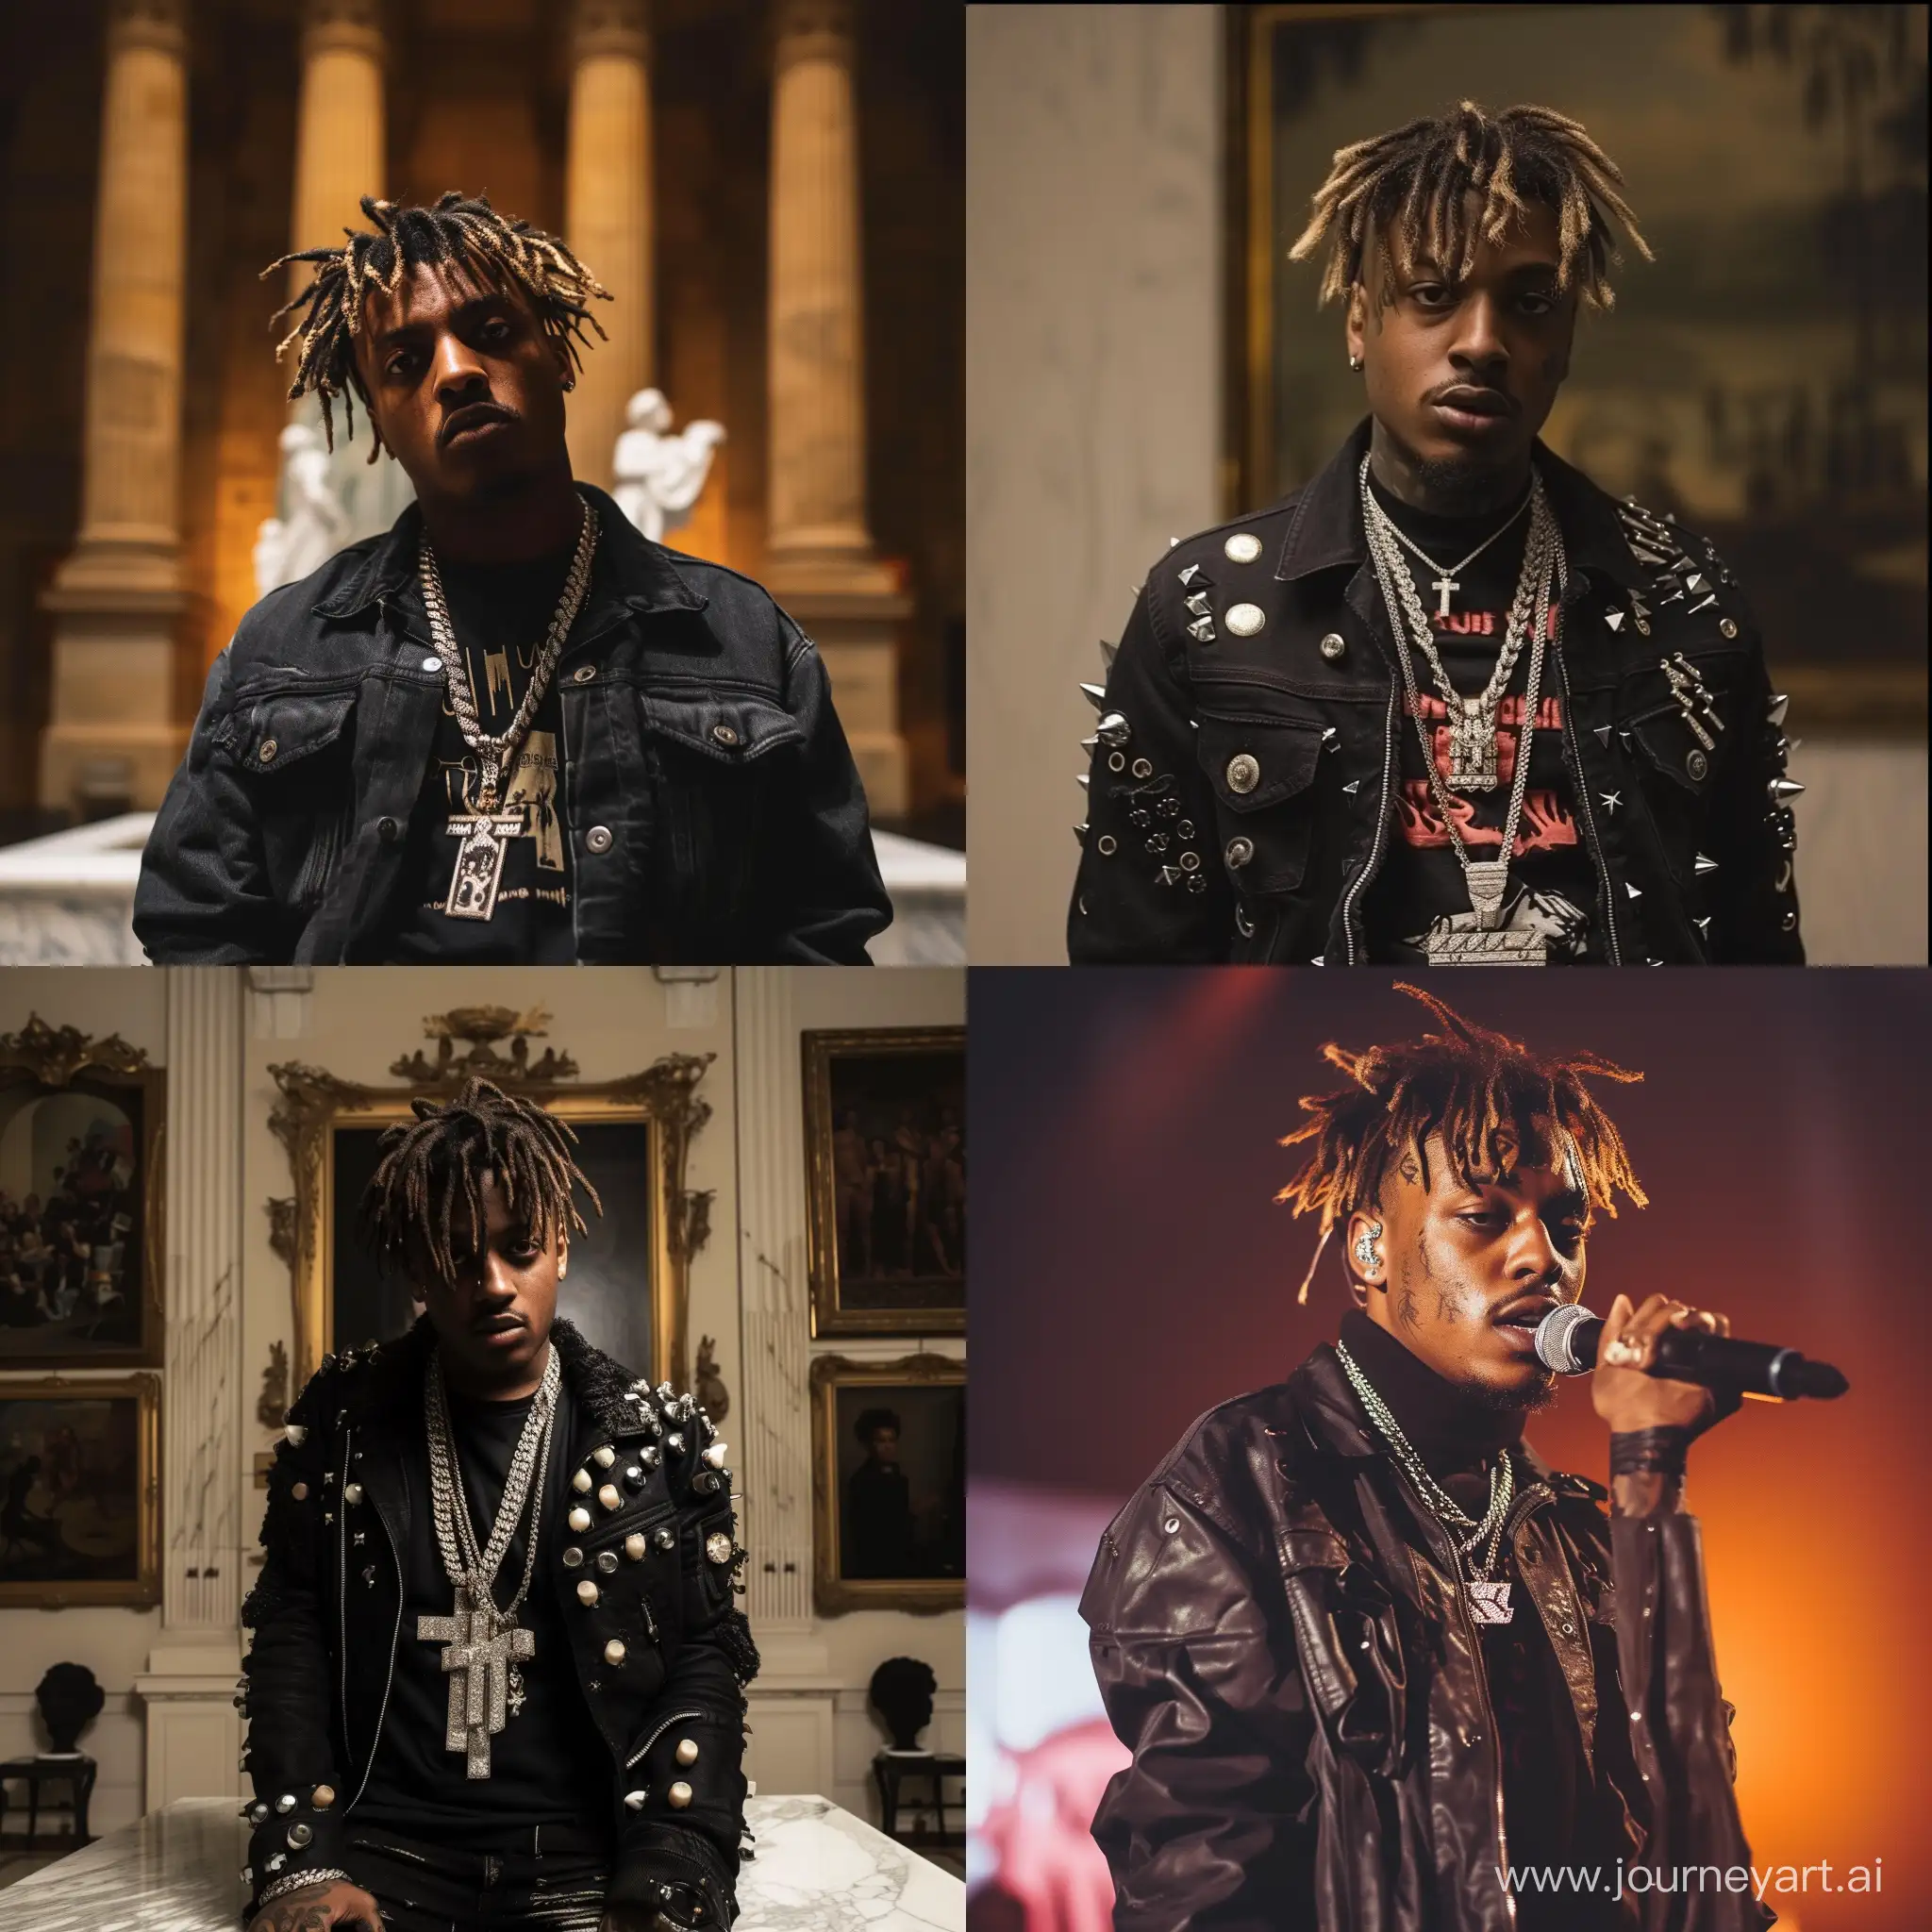 A Photograph of Juice WRLD,in the Night At The Museum.